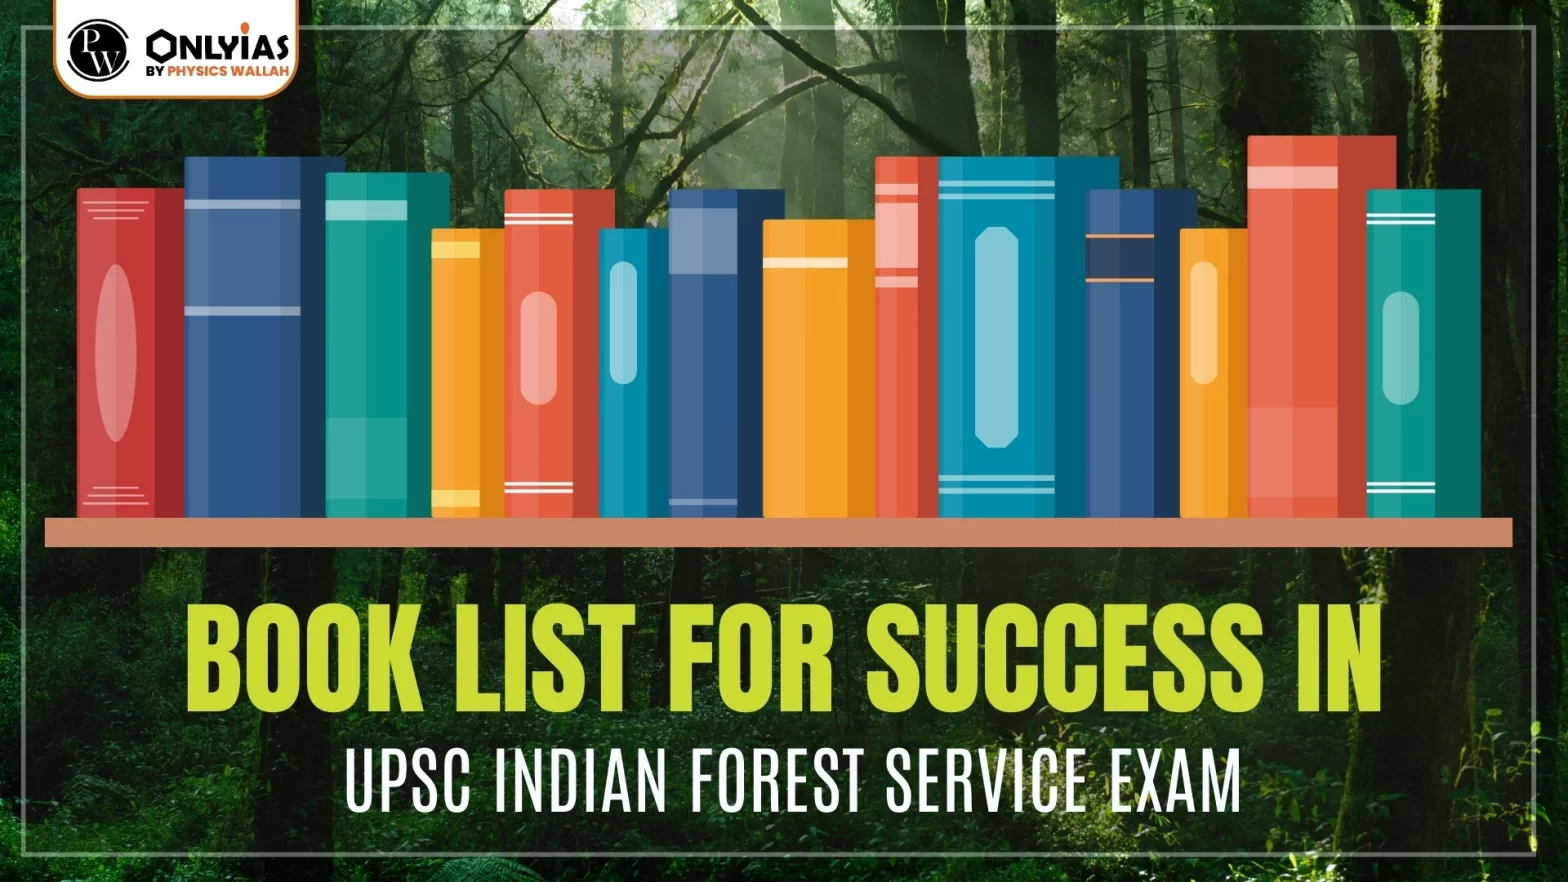 Book List for Success in UPSC Indian Forest Service Exam